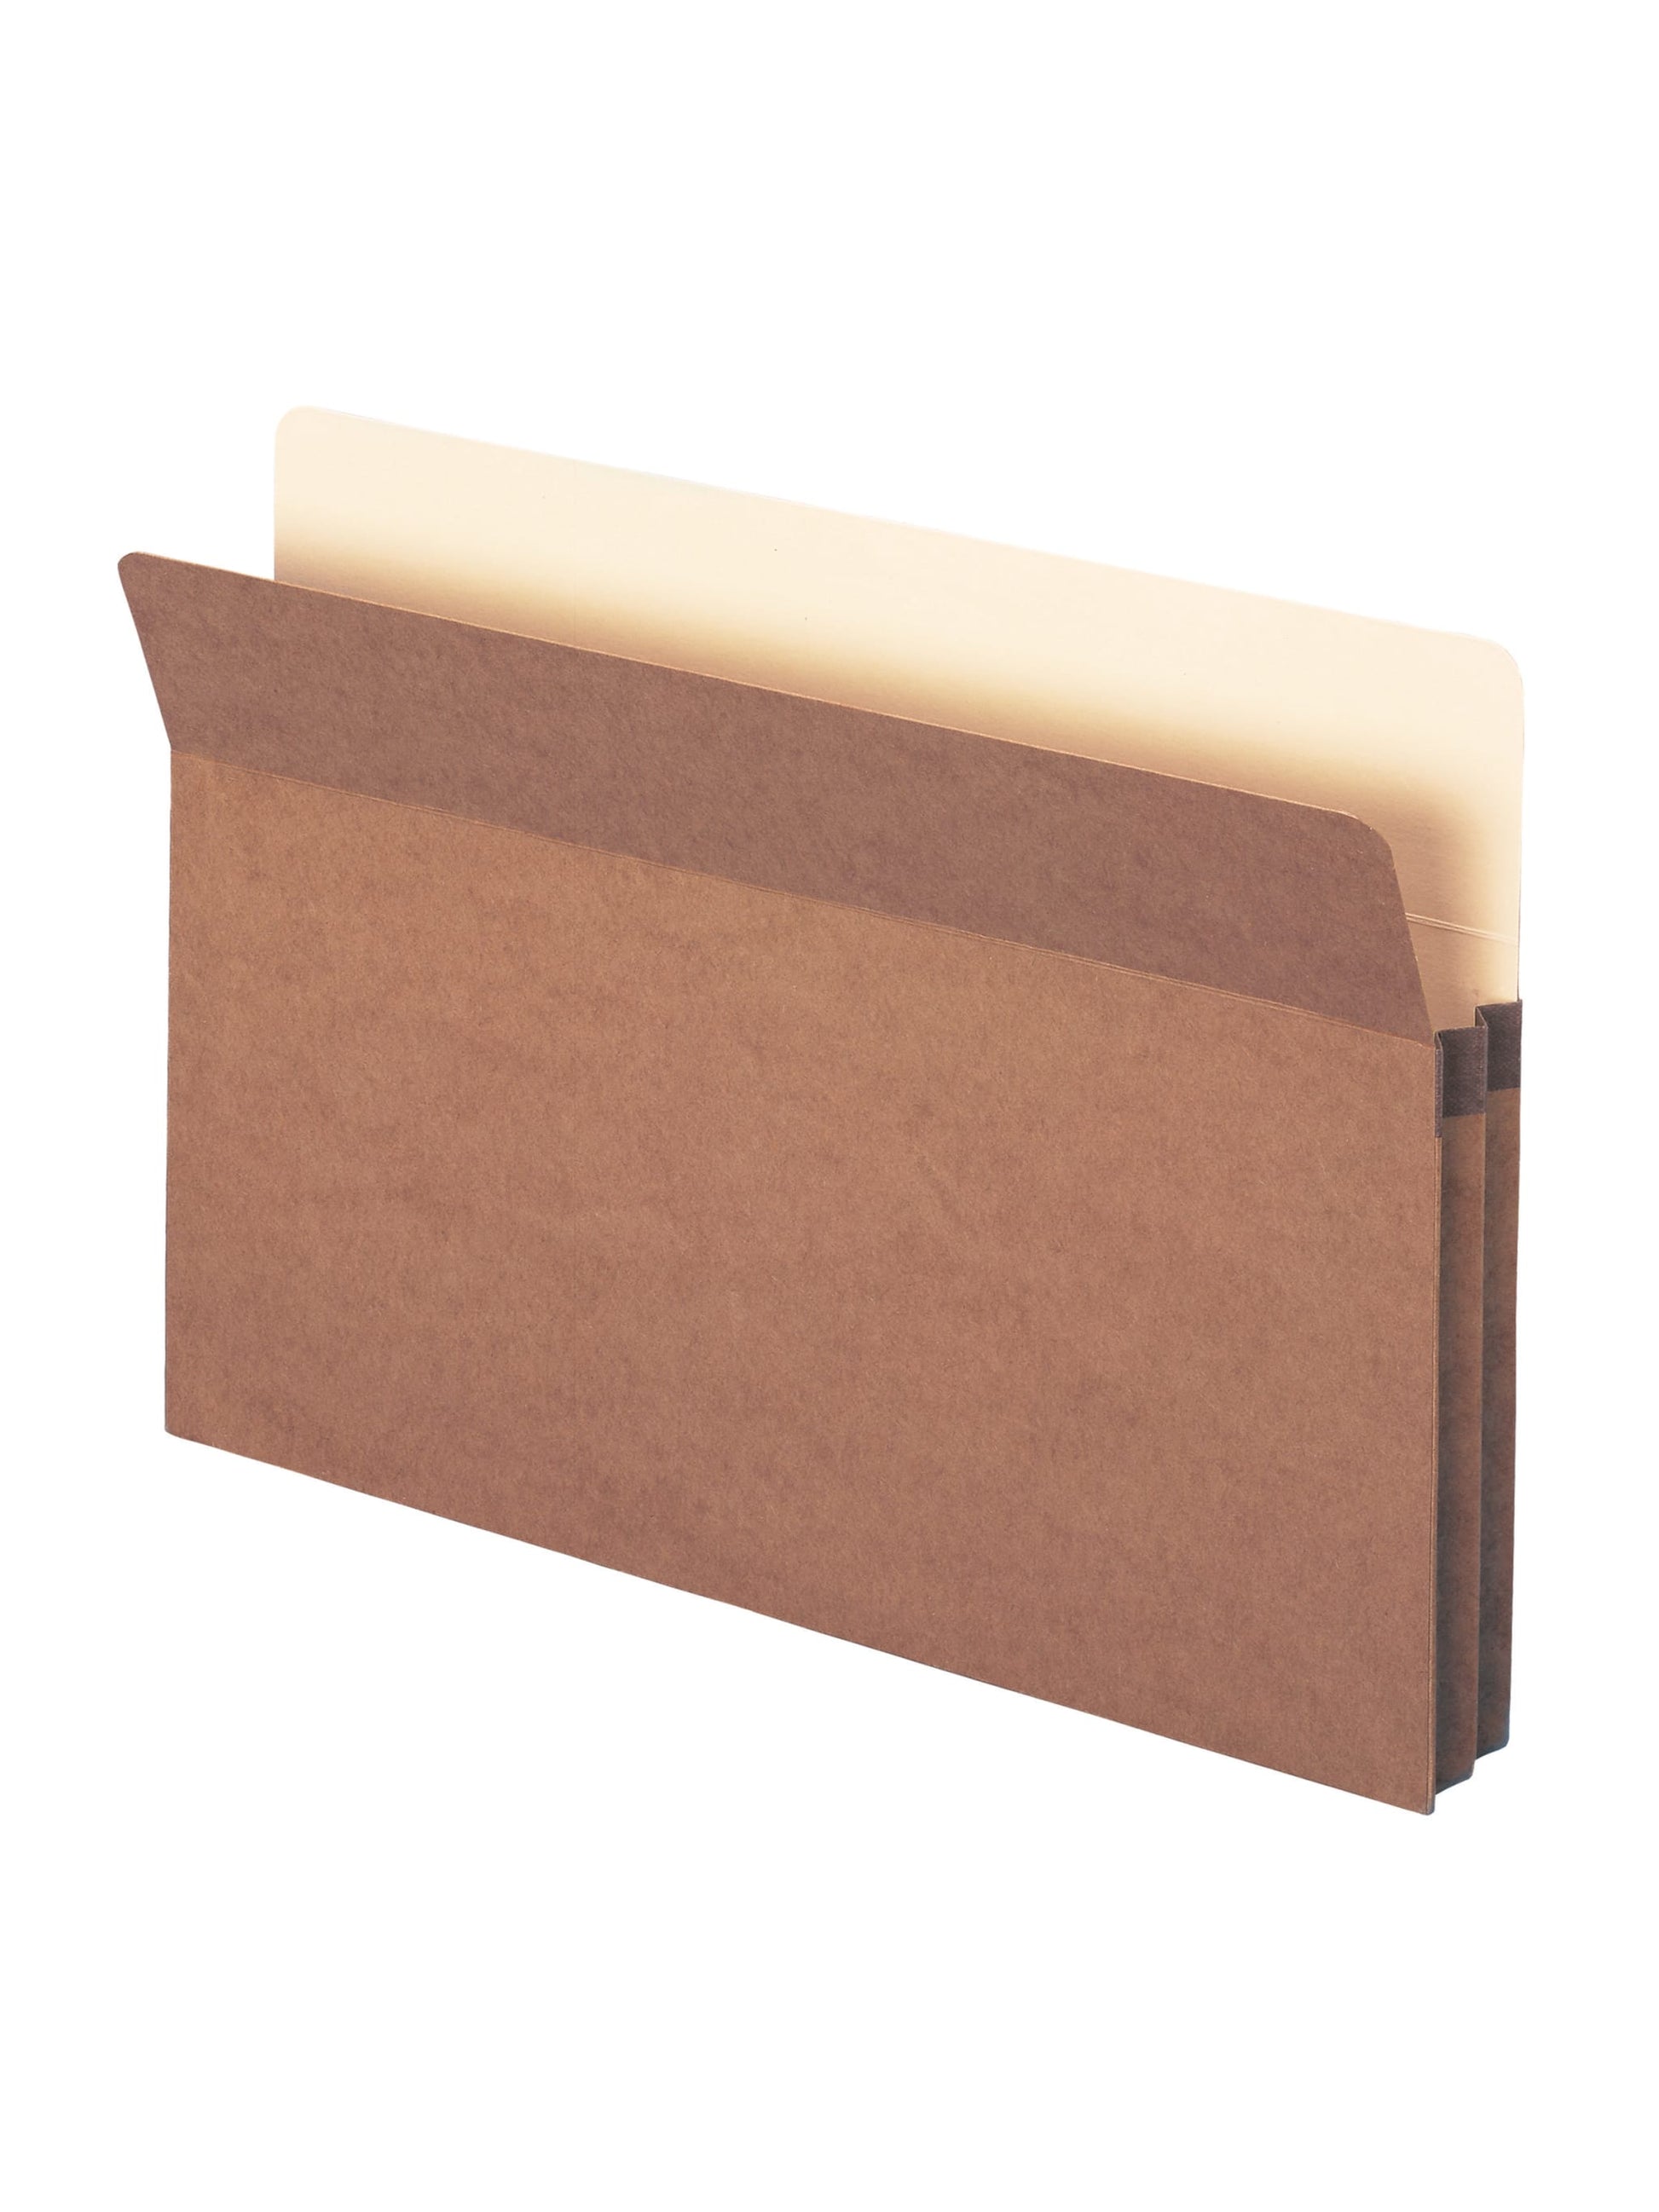 Redrope File Pockets, Straight Cut Tab, 1-3/4 inch Expansion, Redrope Color, Legal Size, Set of 0, 30086486742147